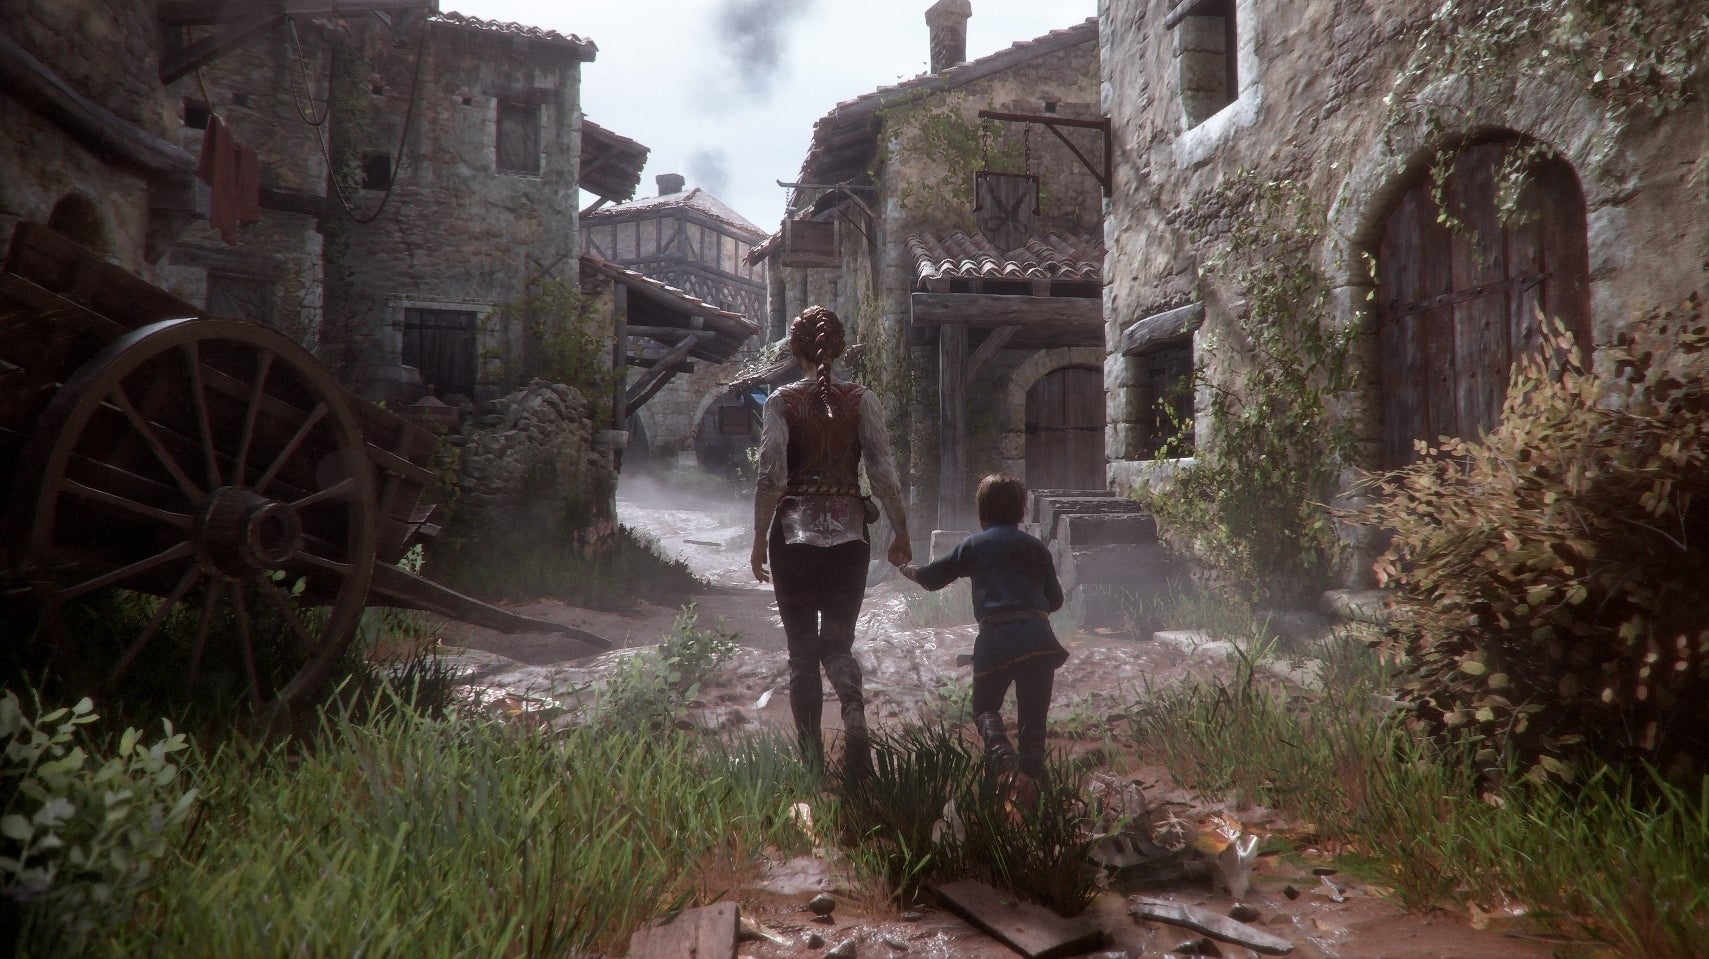 Image for Bleak medieval "single-player co-op" adventure A Plague Tale gets free trial version